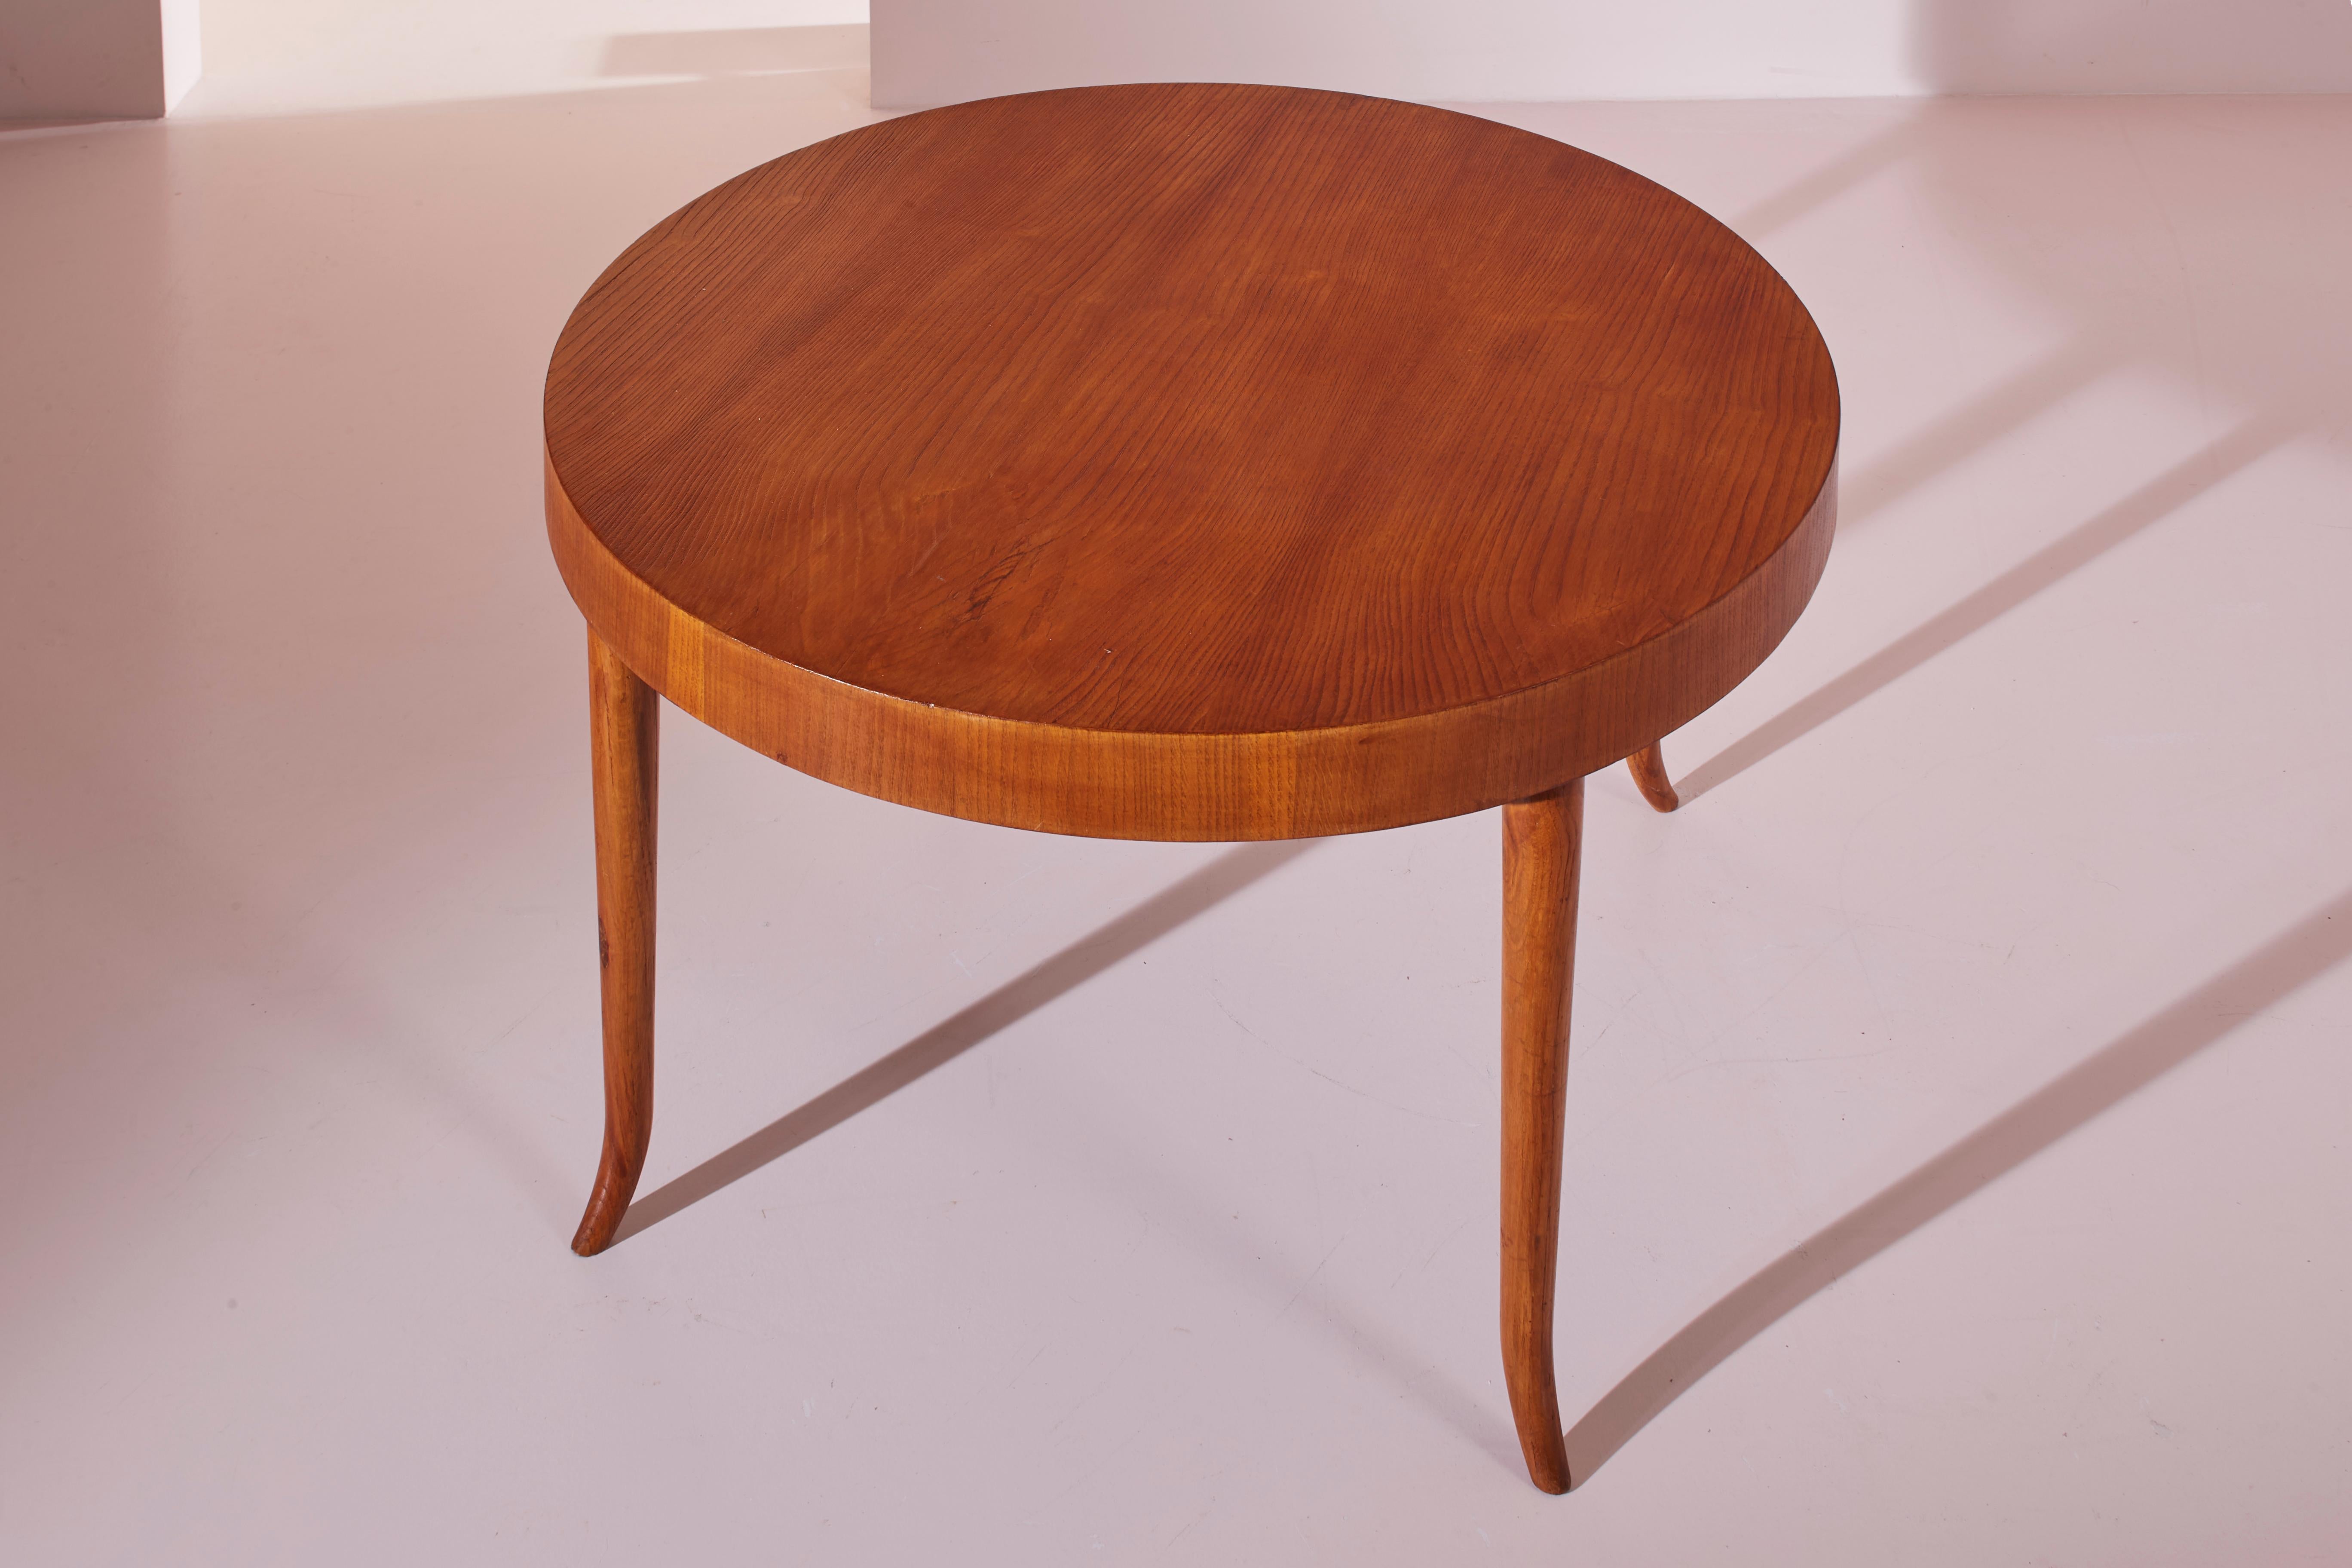 Guglielmo Ulrich oak round dining table, Italy, 1940s For Sale 1